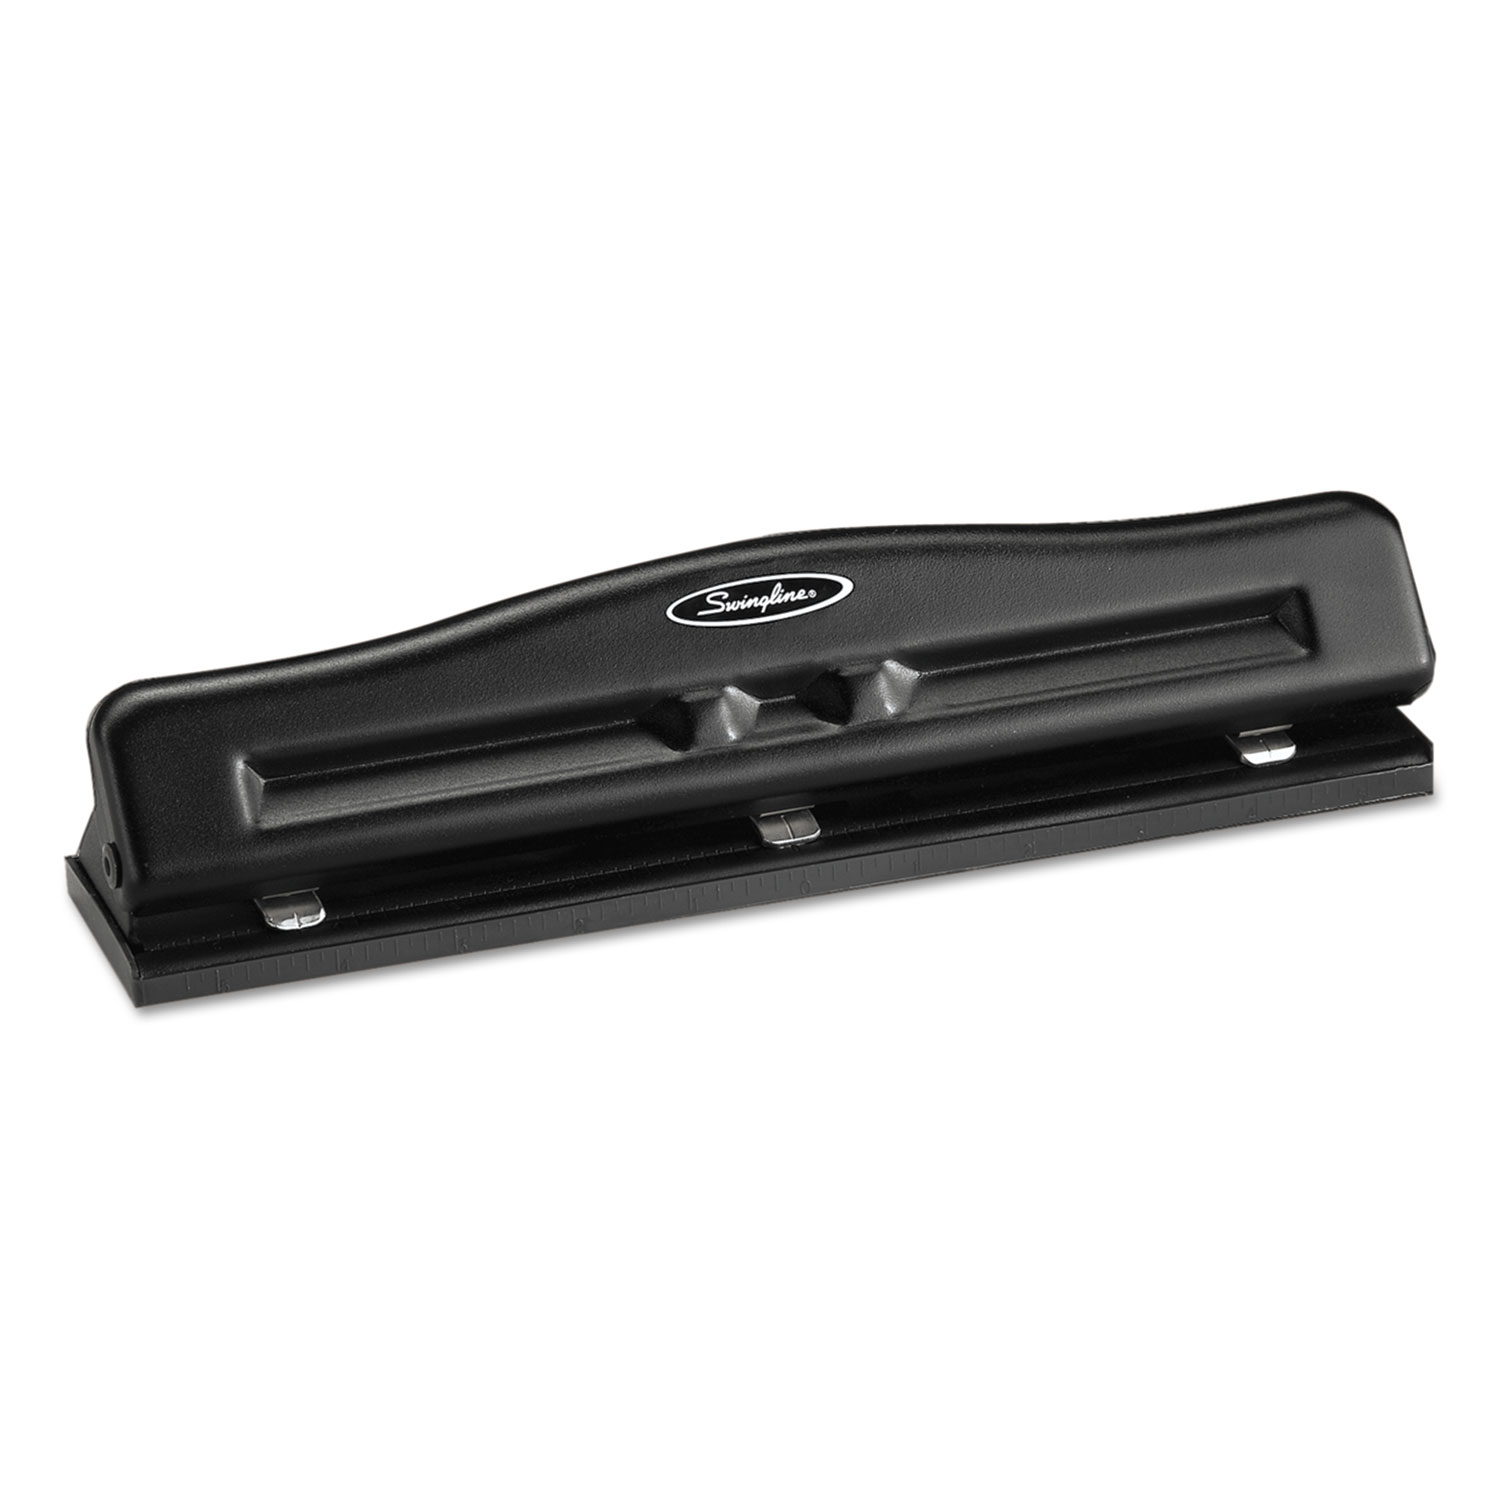 11-Sheet Commercial Adjustable Three-Hole Punch, 9/32" Holes, Black